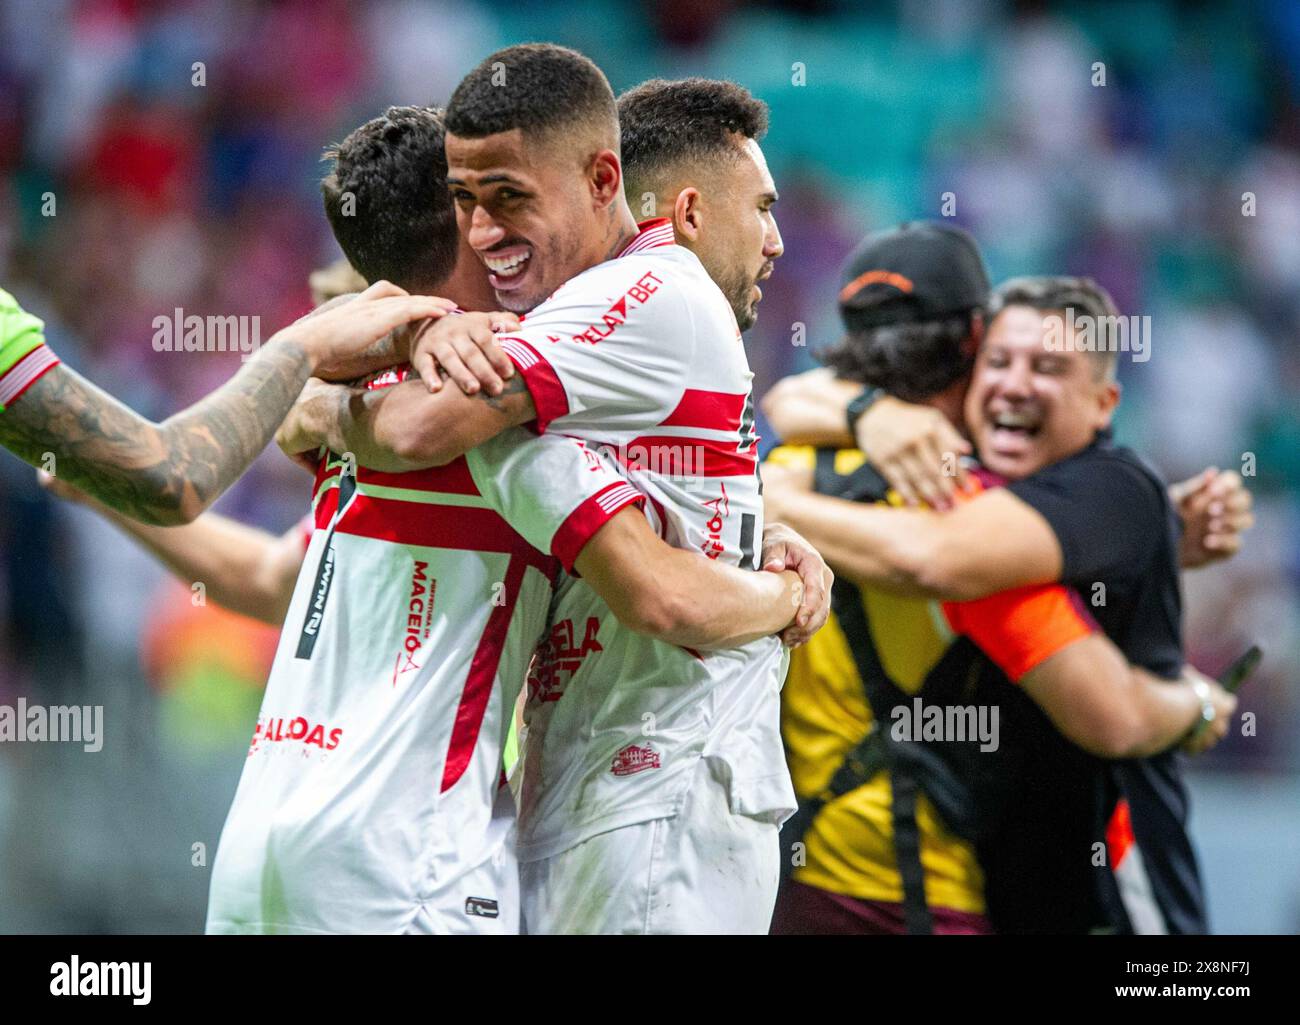 Salvador, Brazil. 26th May, 2024. BA - SALVADOR - 05/26/2024 - COPA DO NORDESTE 2024, BAHIA x CRB - CRB players celebrate victory at the end of the match against Bahia at the Arena Fonte Nova stadium for the Copa Do Nordeste 2024 championship. Photo: Jhony Pinho/AGIF Credit: AGIF/Alamy Live News Stock Photo